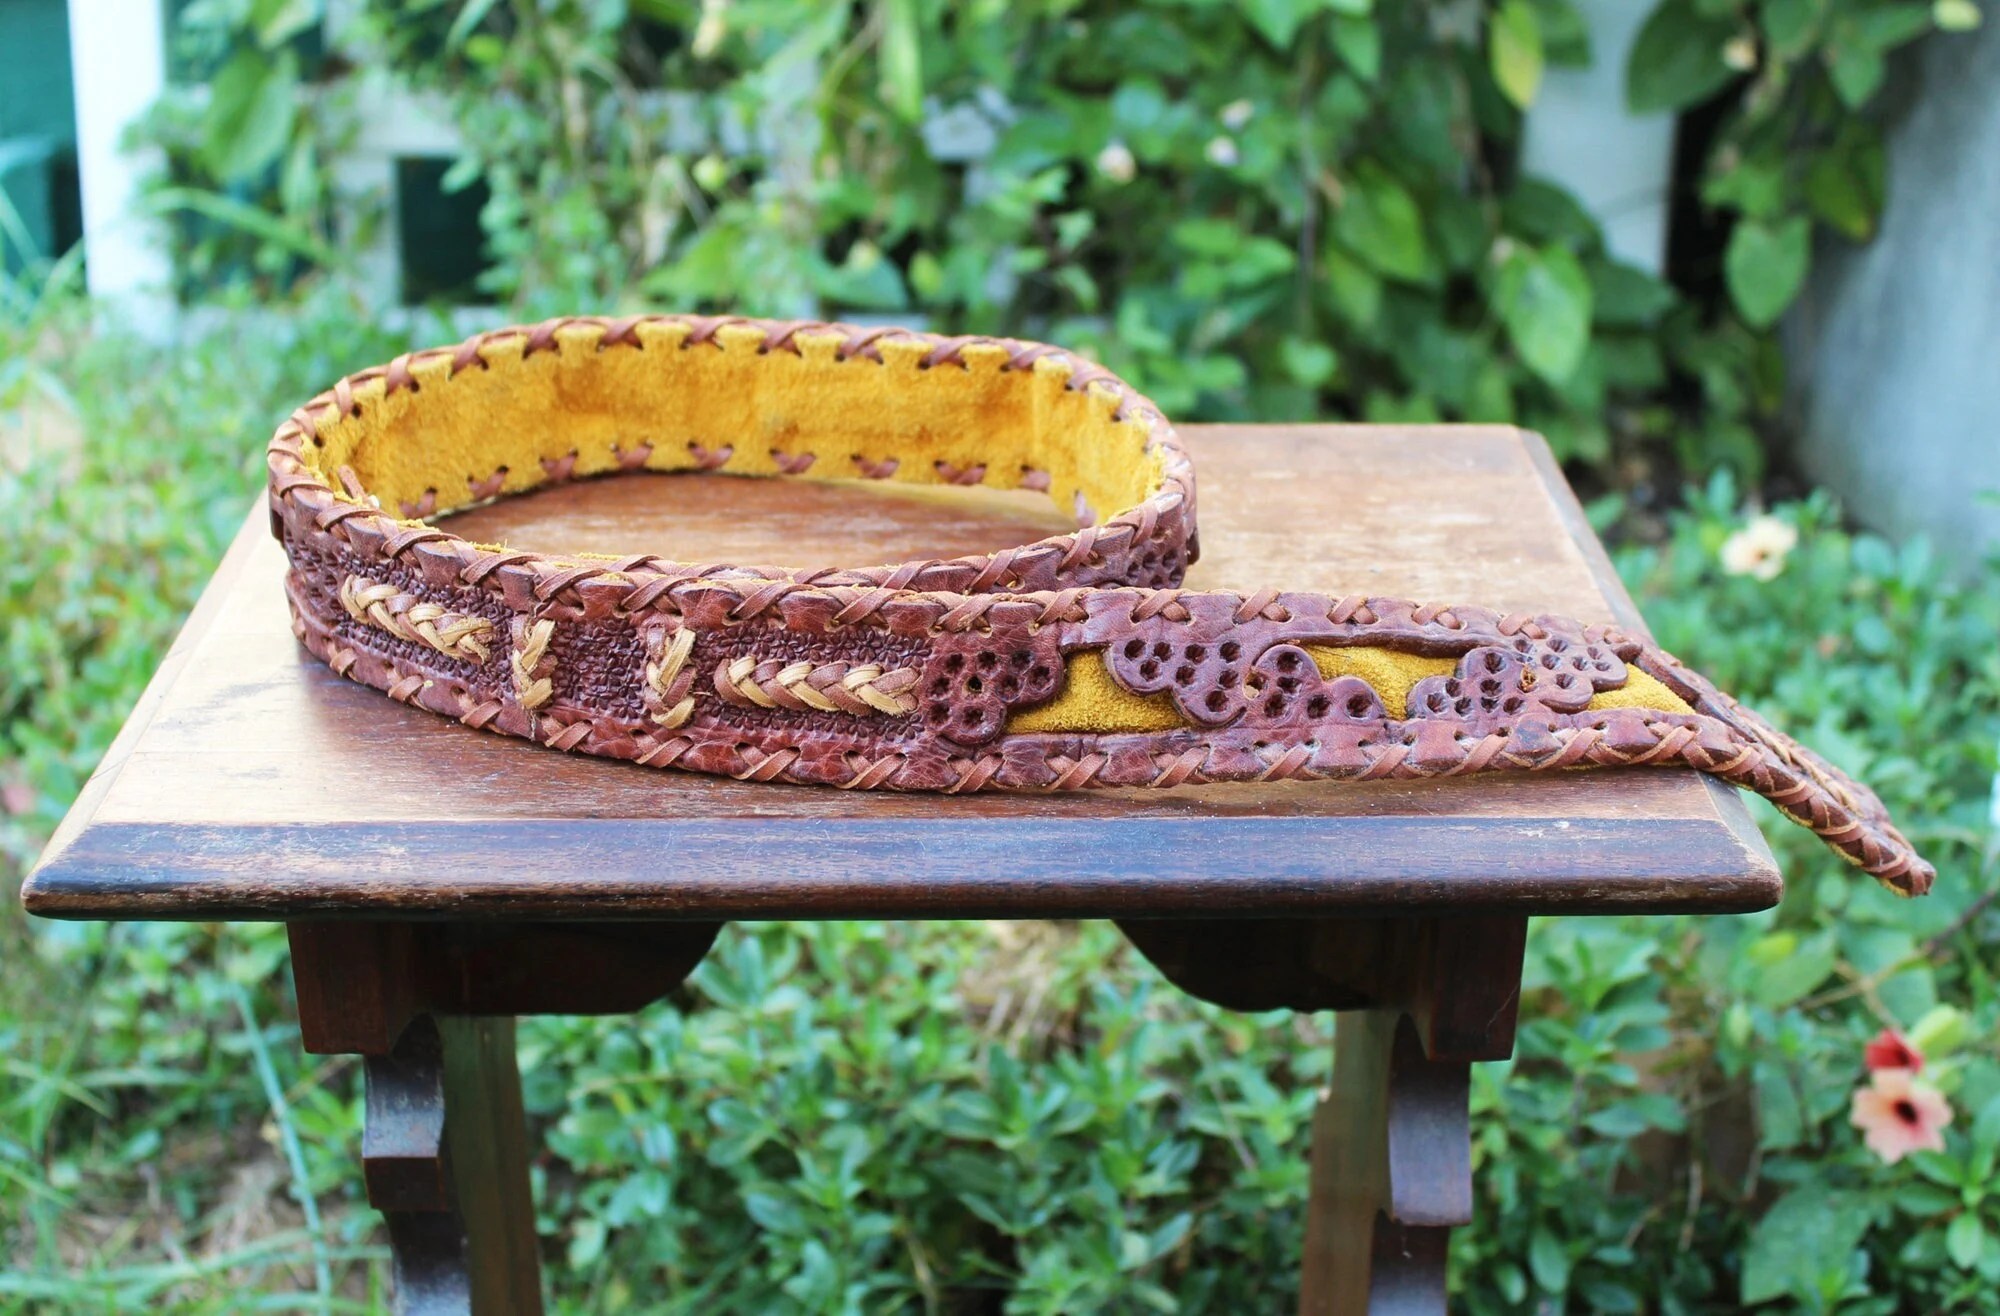 1970s Handmade Southwestern Tooled and Woven Brown Leather Suede Lined Belt - Mexico - Vintage, Retro, Boho, Indie, Hippie, Country, Western